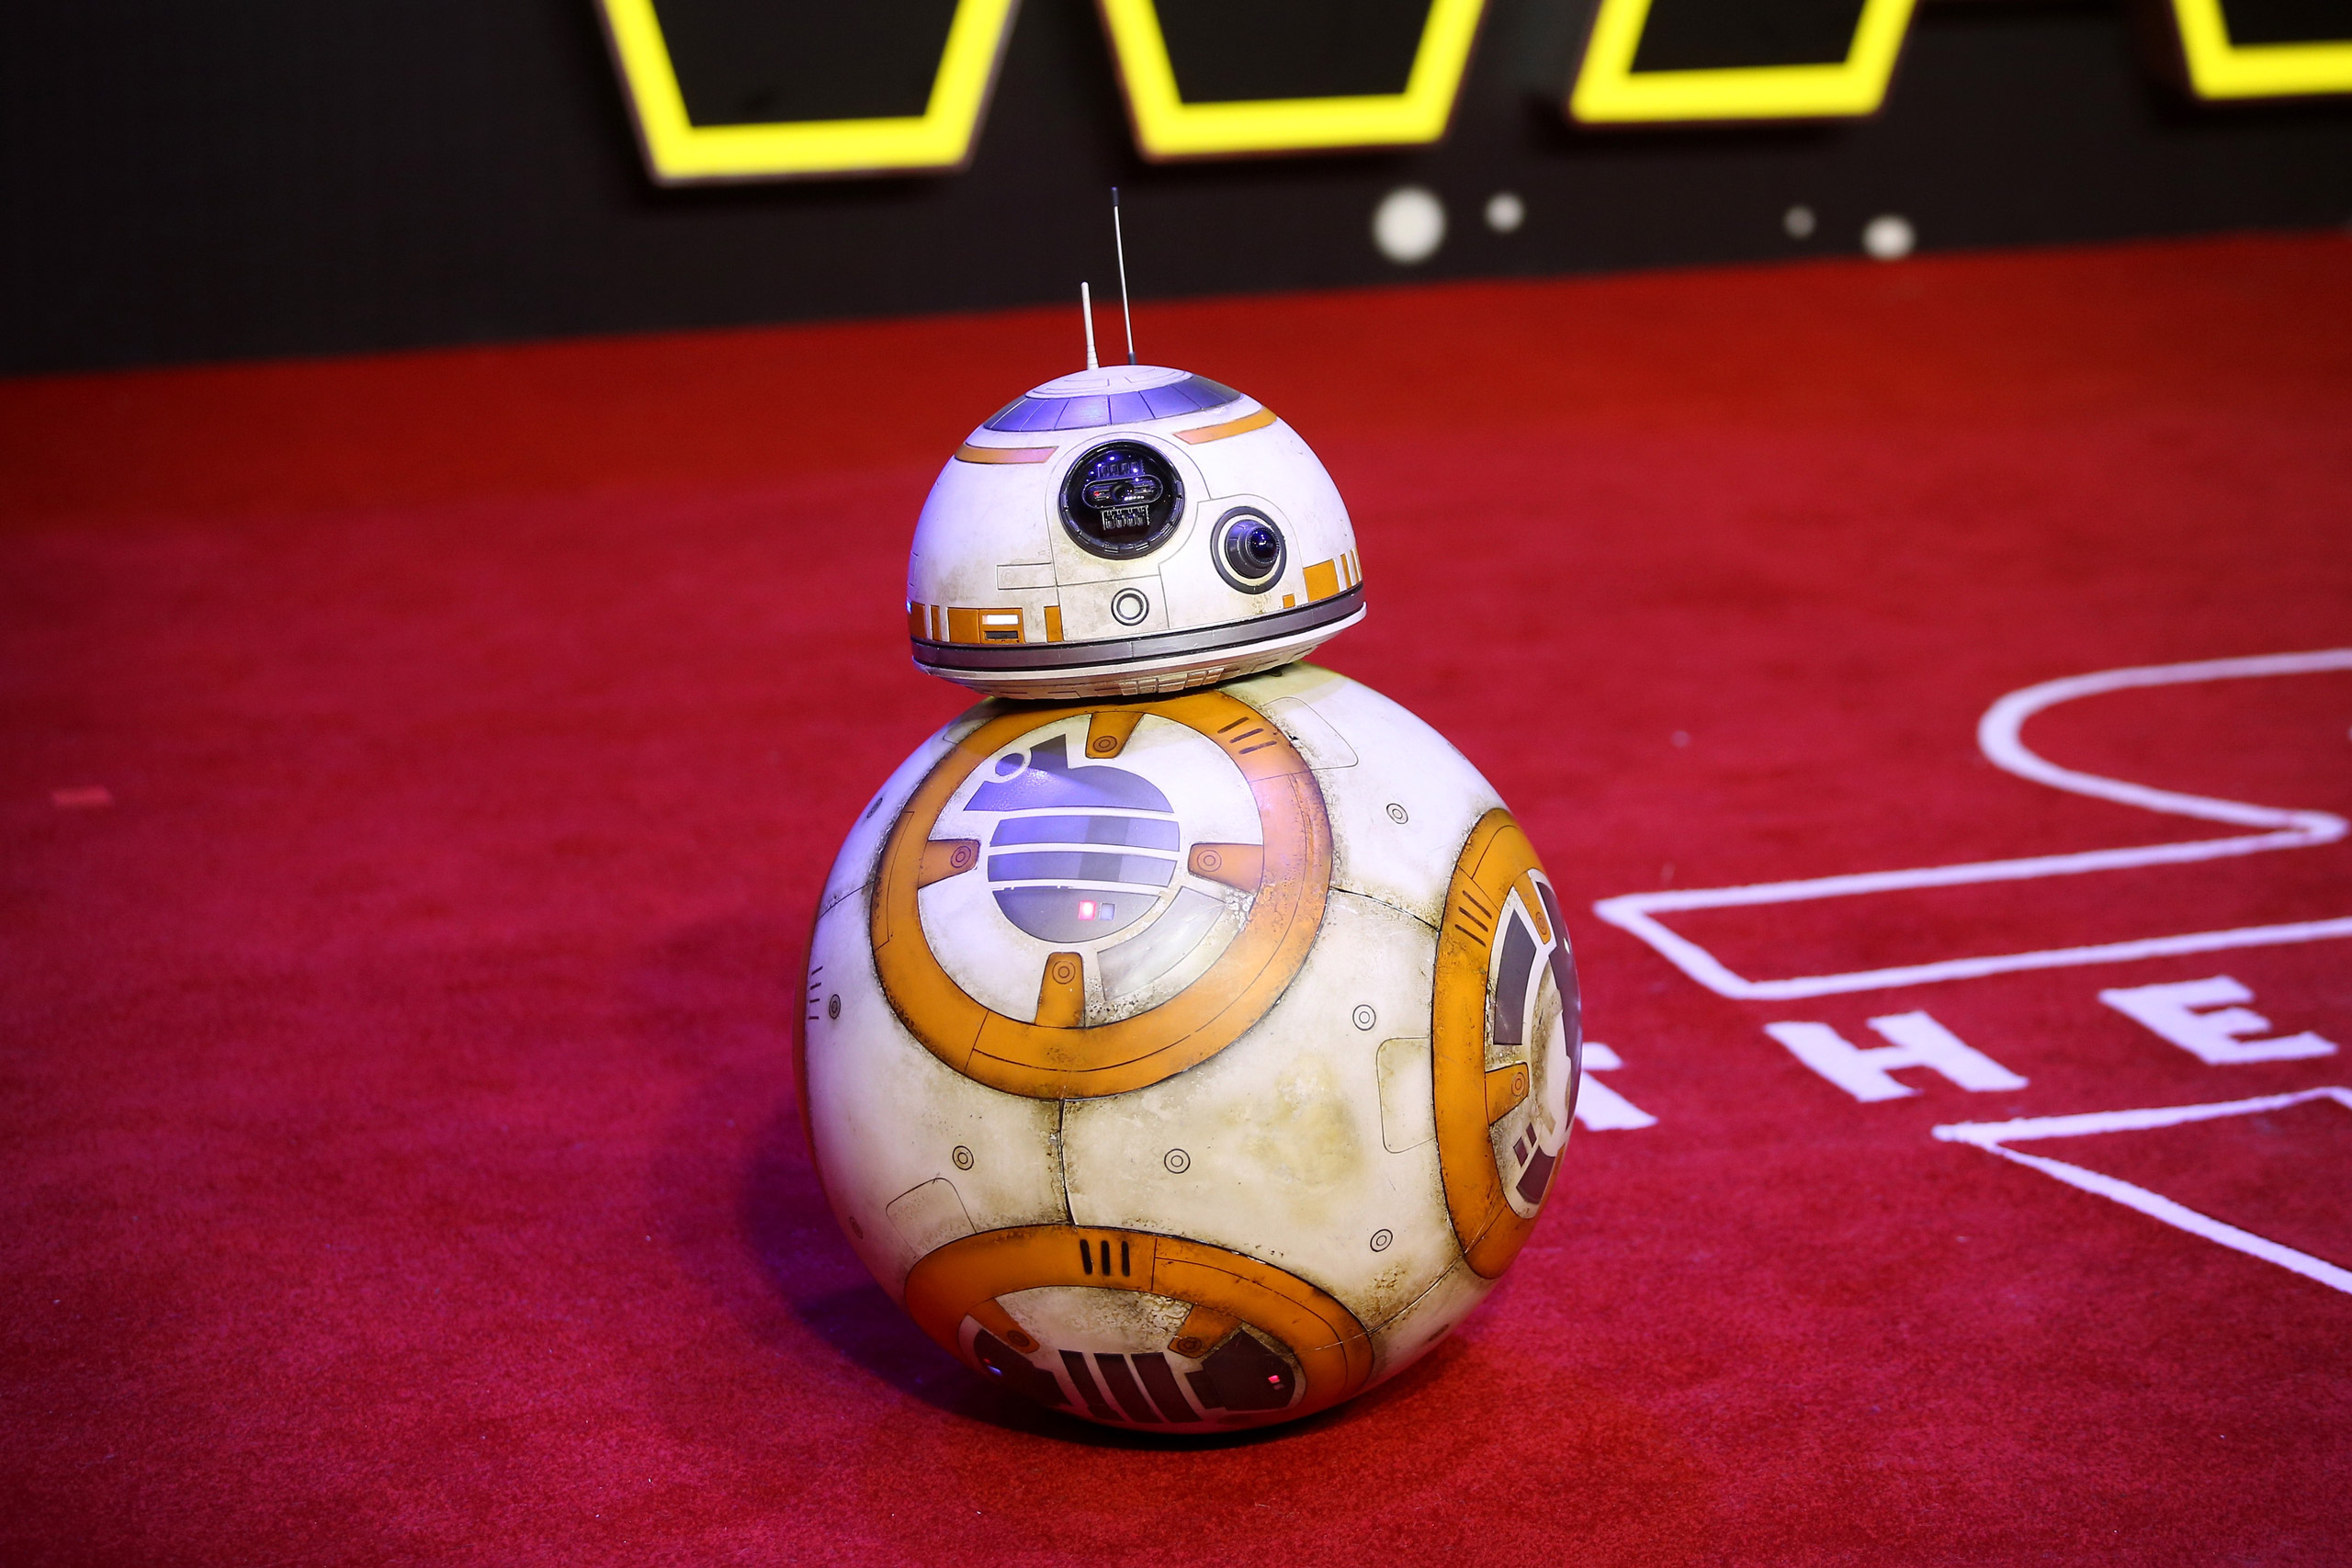 BB-8 attends the European Premiere of "Star Wars: The Force Awakens" at Leicester Square in London on Dec. 16, 2015. (Mike Marsland—WireImage/Getty Imges)